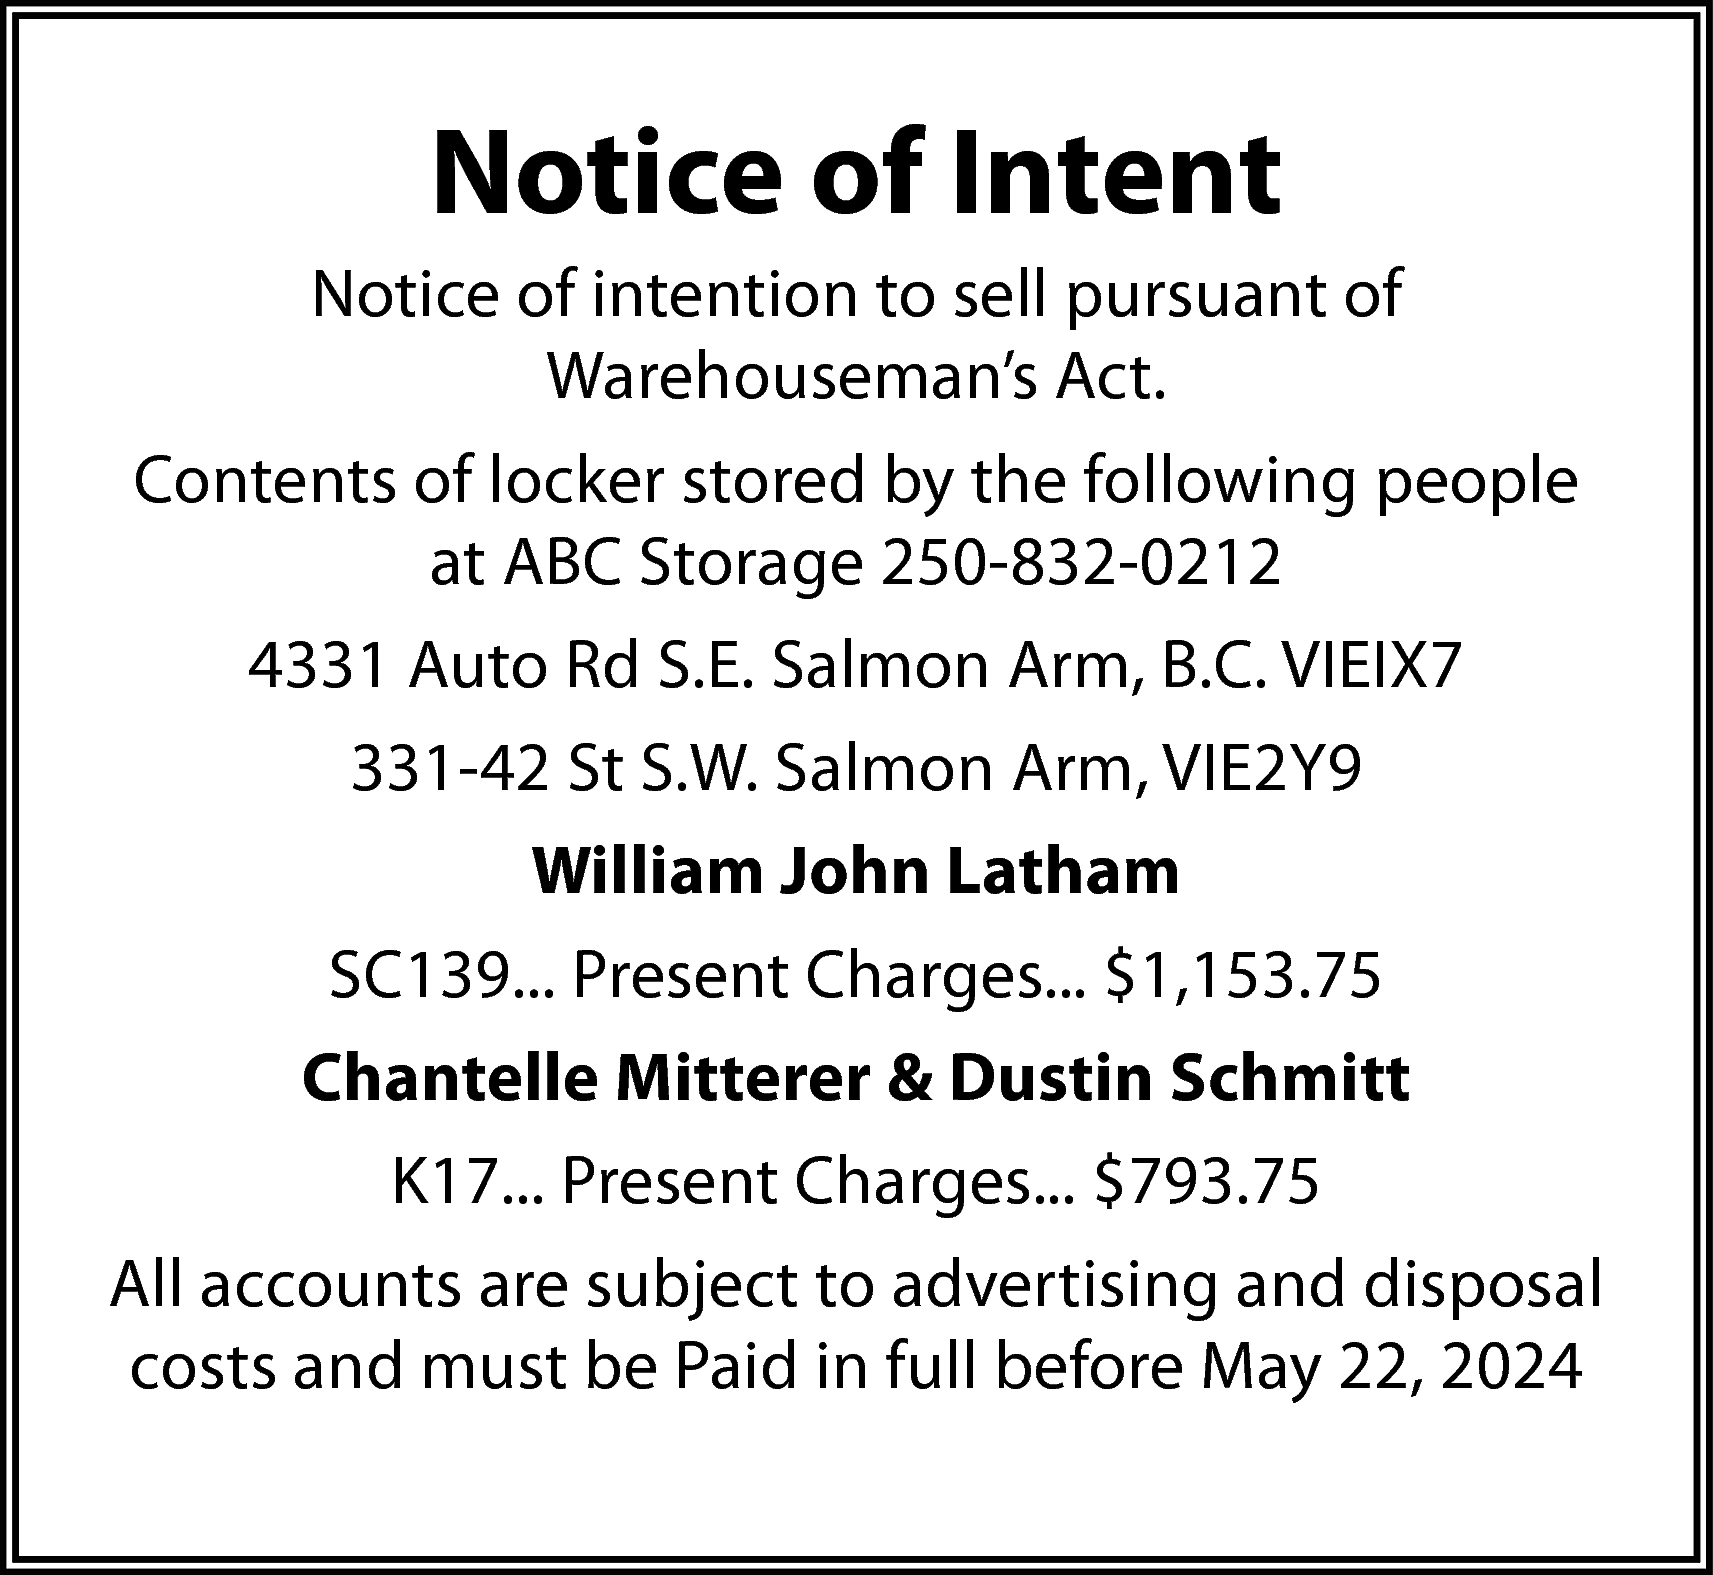 Notice of Intent <br>Notice of  Notice of Intent  Notice of intention to sell pursuant of  Warehouseman’s Act.  Contents of locker stored by the following people  at ABC Storage 250-832-0212  4331 Auto Rd S.E. Salmon Arm, B.C. VIEIX7  331-42 St S.W. Salmon Arm, VIE2Y9  William John Latham  SC139... Present Charges... $1,153.75  Chantelle Mitterer & Dustin Schmitt  K17... Present Charges... $793.75  All accounts are subject to advertising and disposal  costs and must be Paid in full before May 22, 2024    